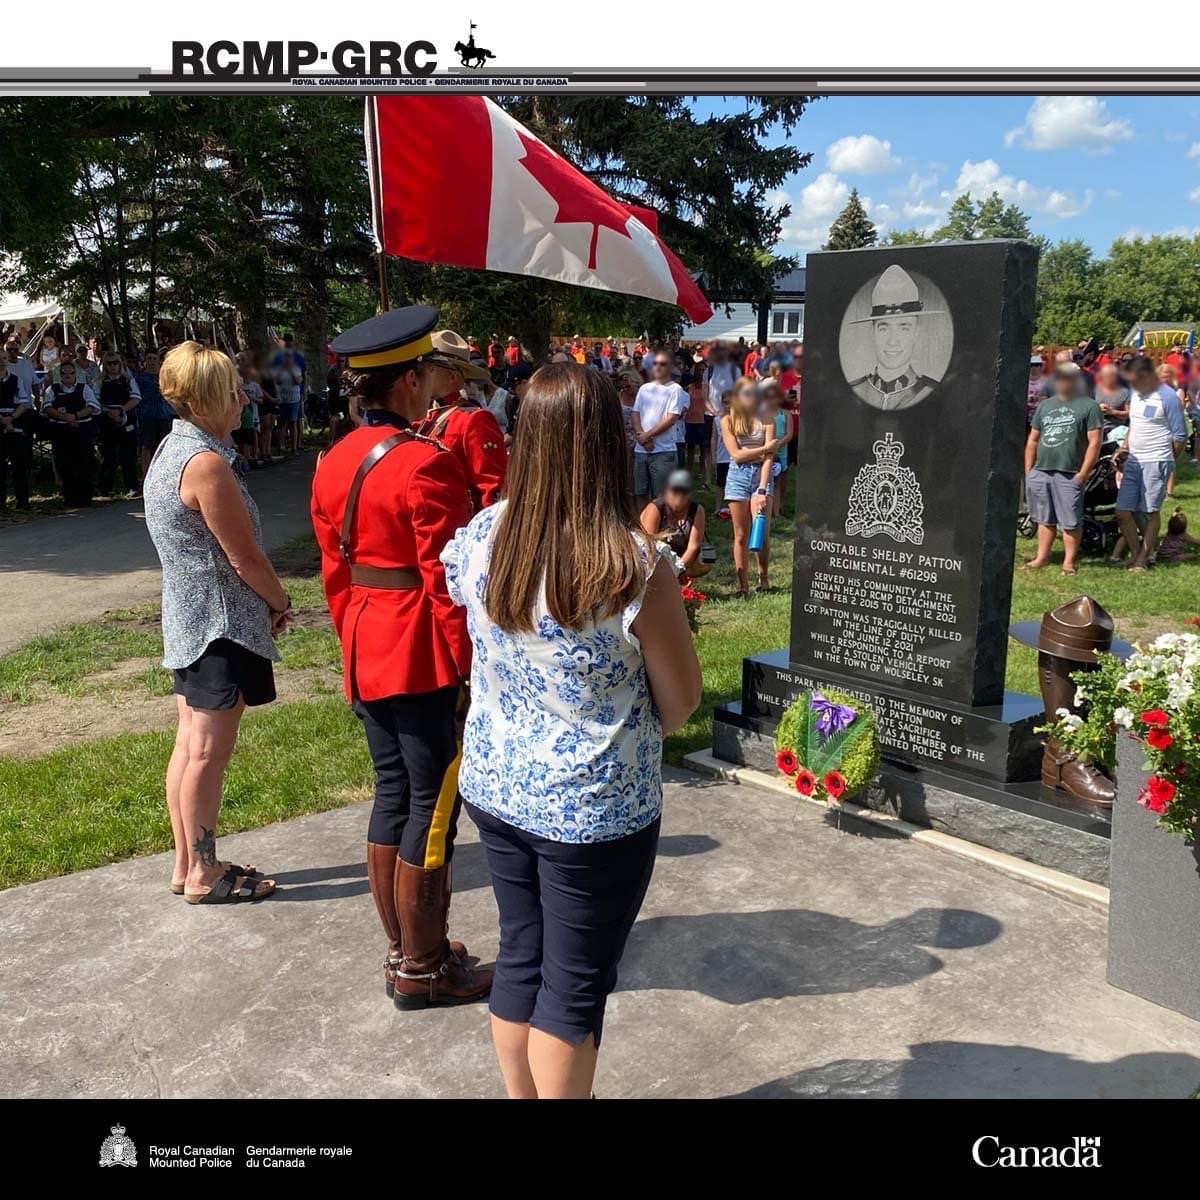 Last August, a fundraising committee was established with a goal of raising $150,00 for the park in honour of the officer. And now, the group has raised over $225,000 for the project. On Saturday, Aug. 20, 2022 the park was unveiled.